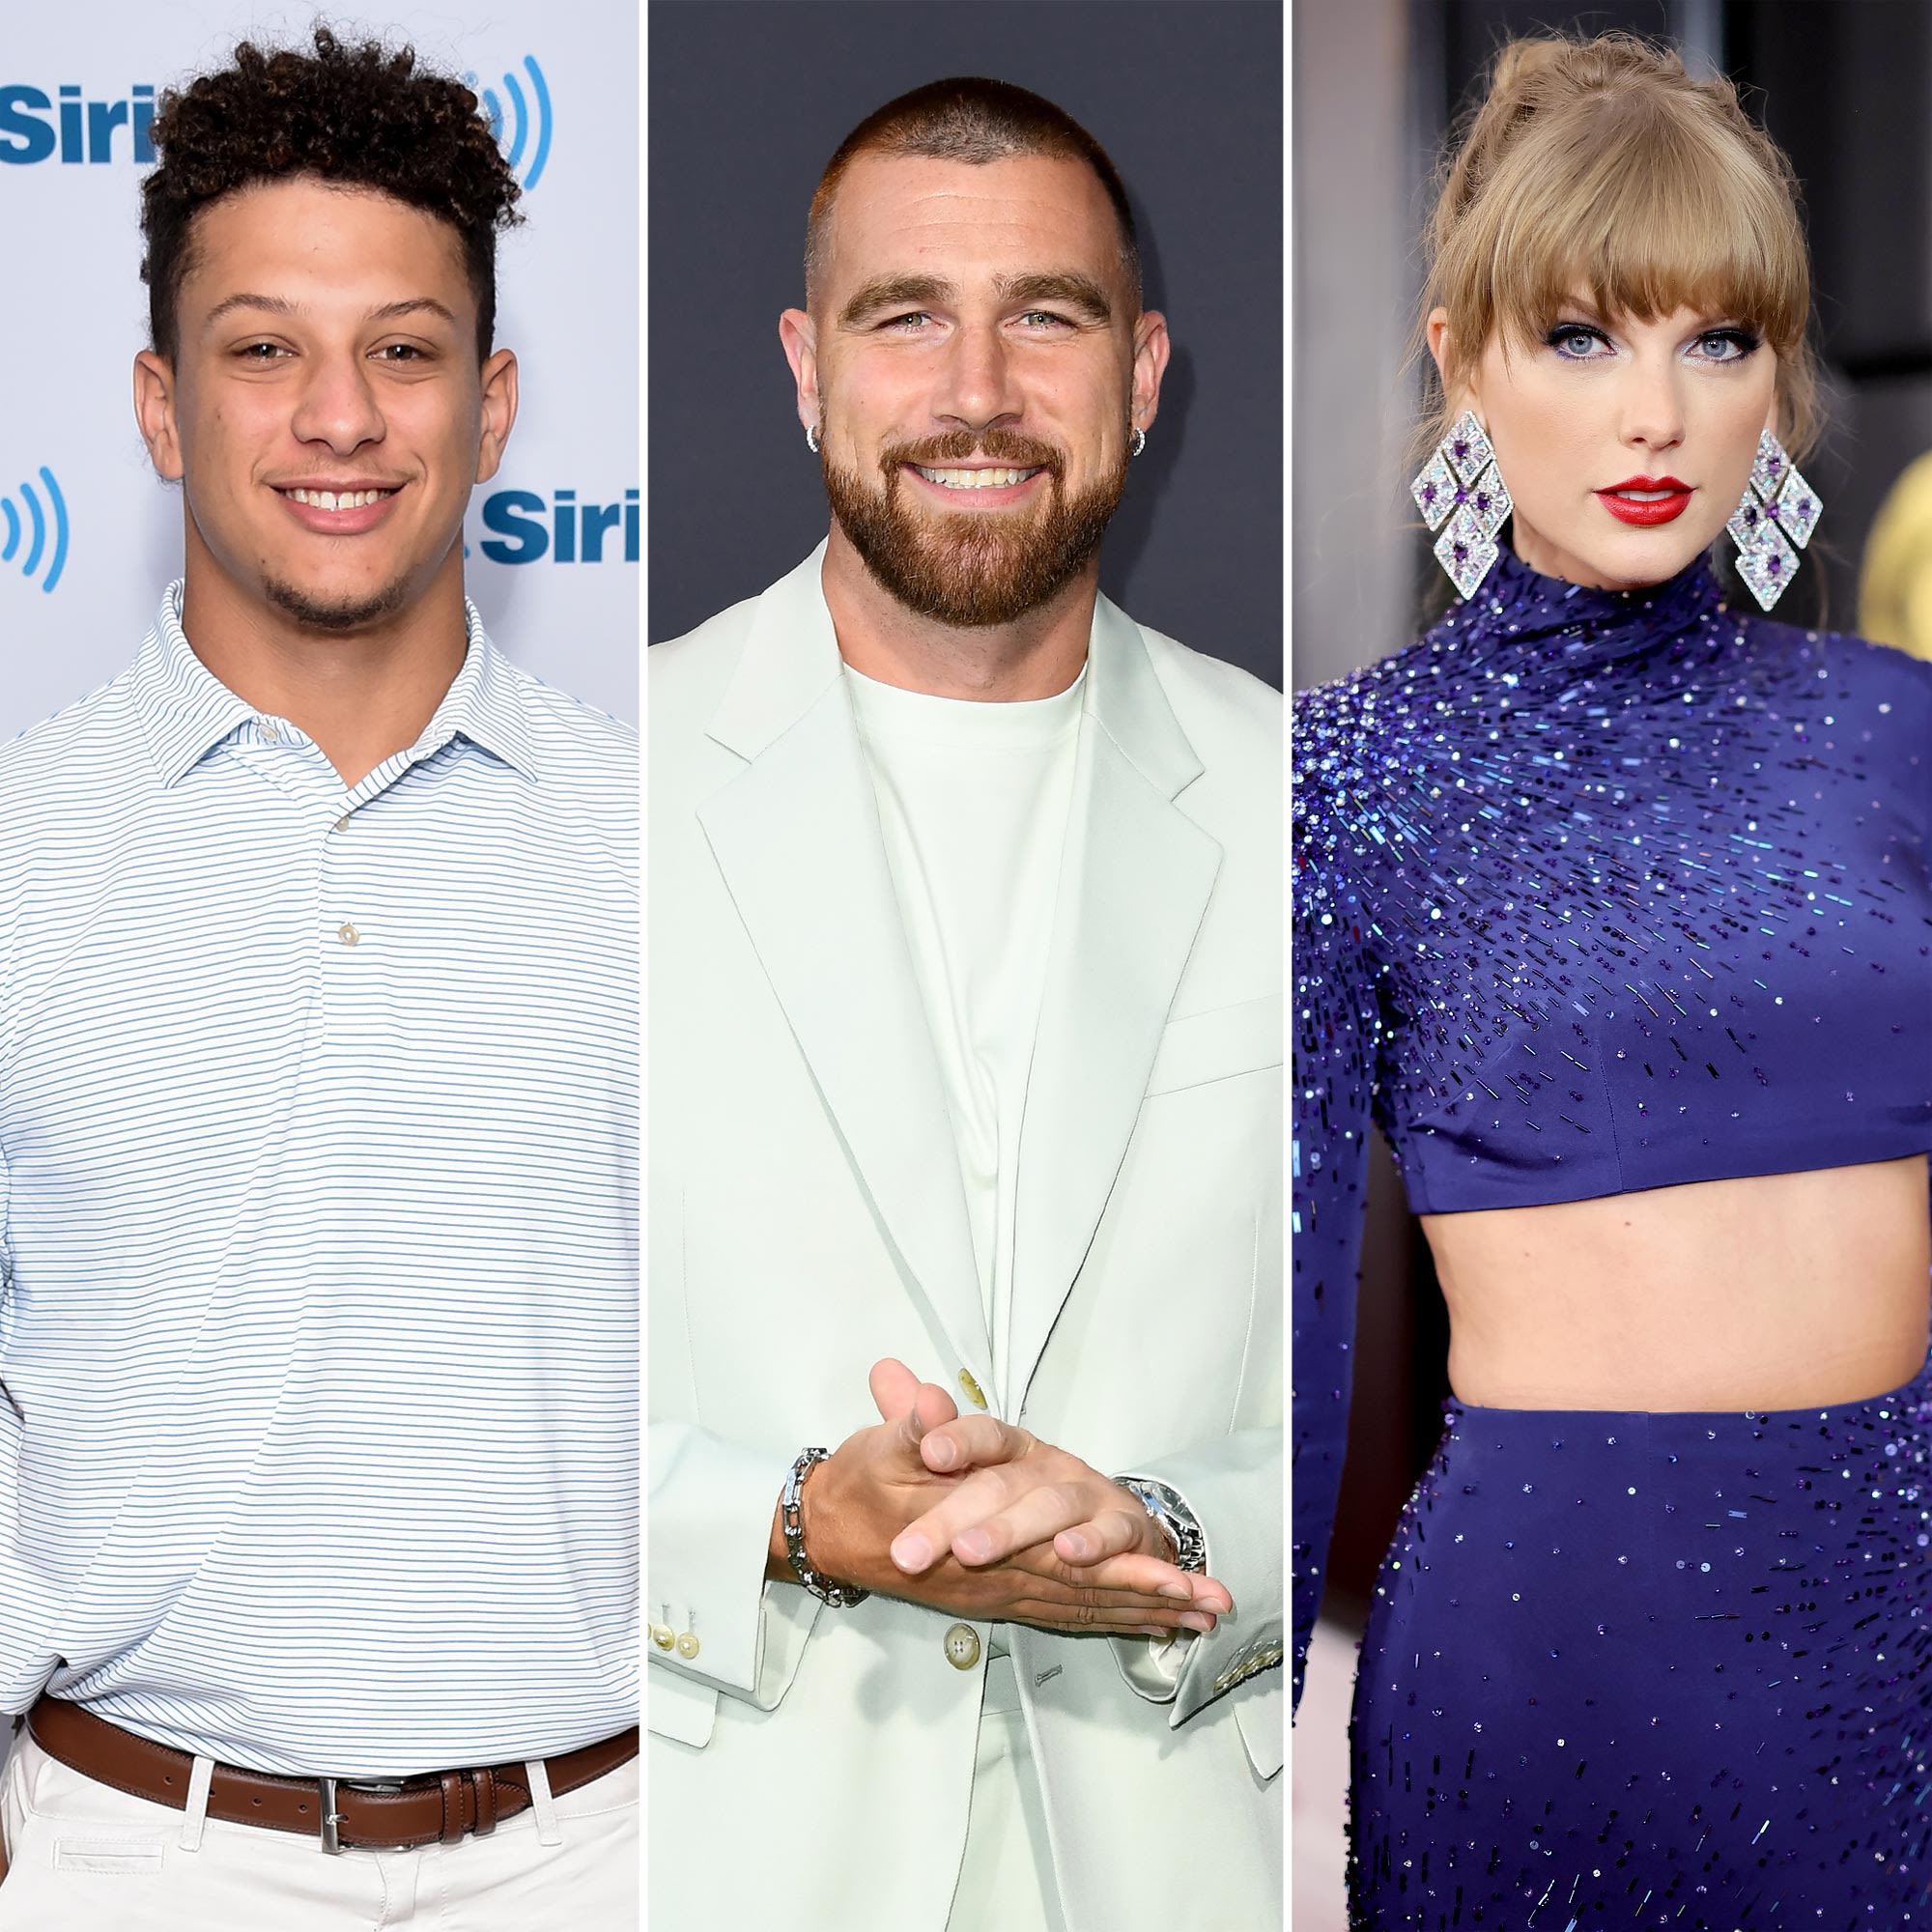 Patrick Mahomes Says He Told Travis Kelce to ‘Go for It’ With Taylor Swift